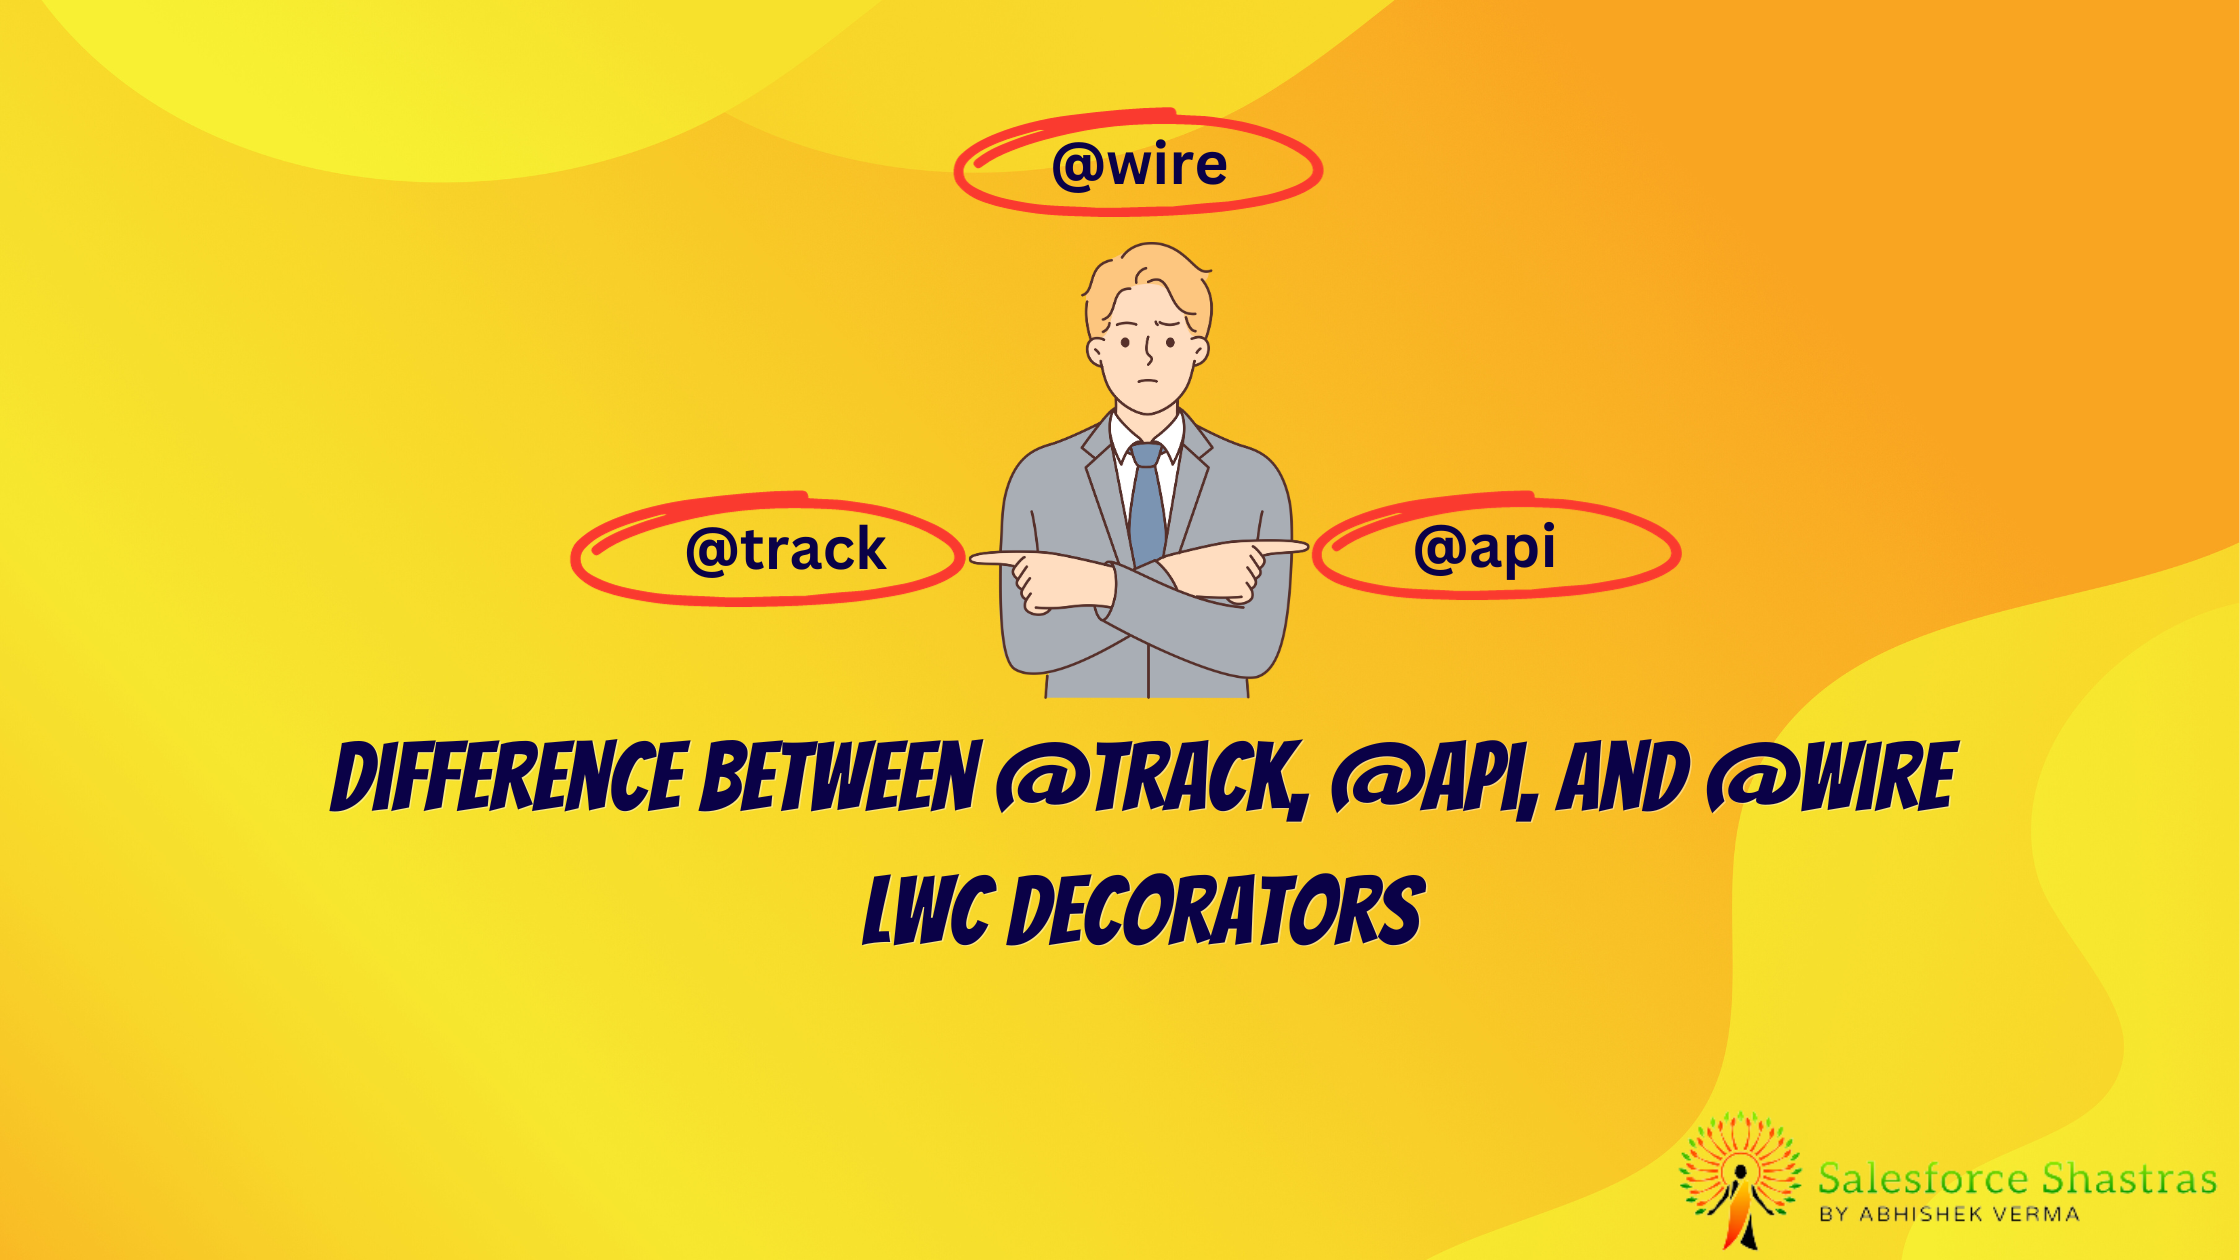 Difference between @track, @api, and @wire LWC decorators Salesforce Shastras